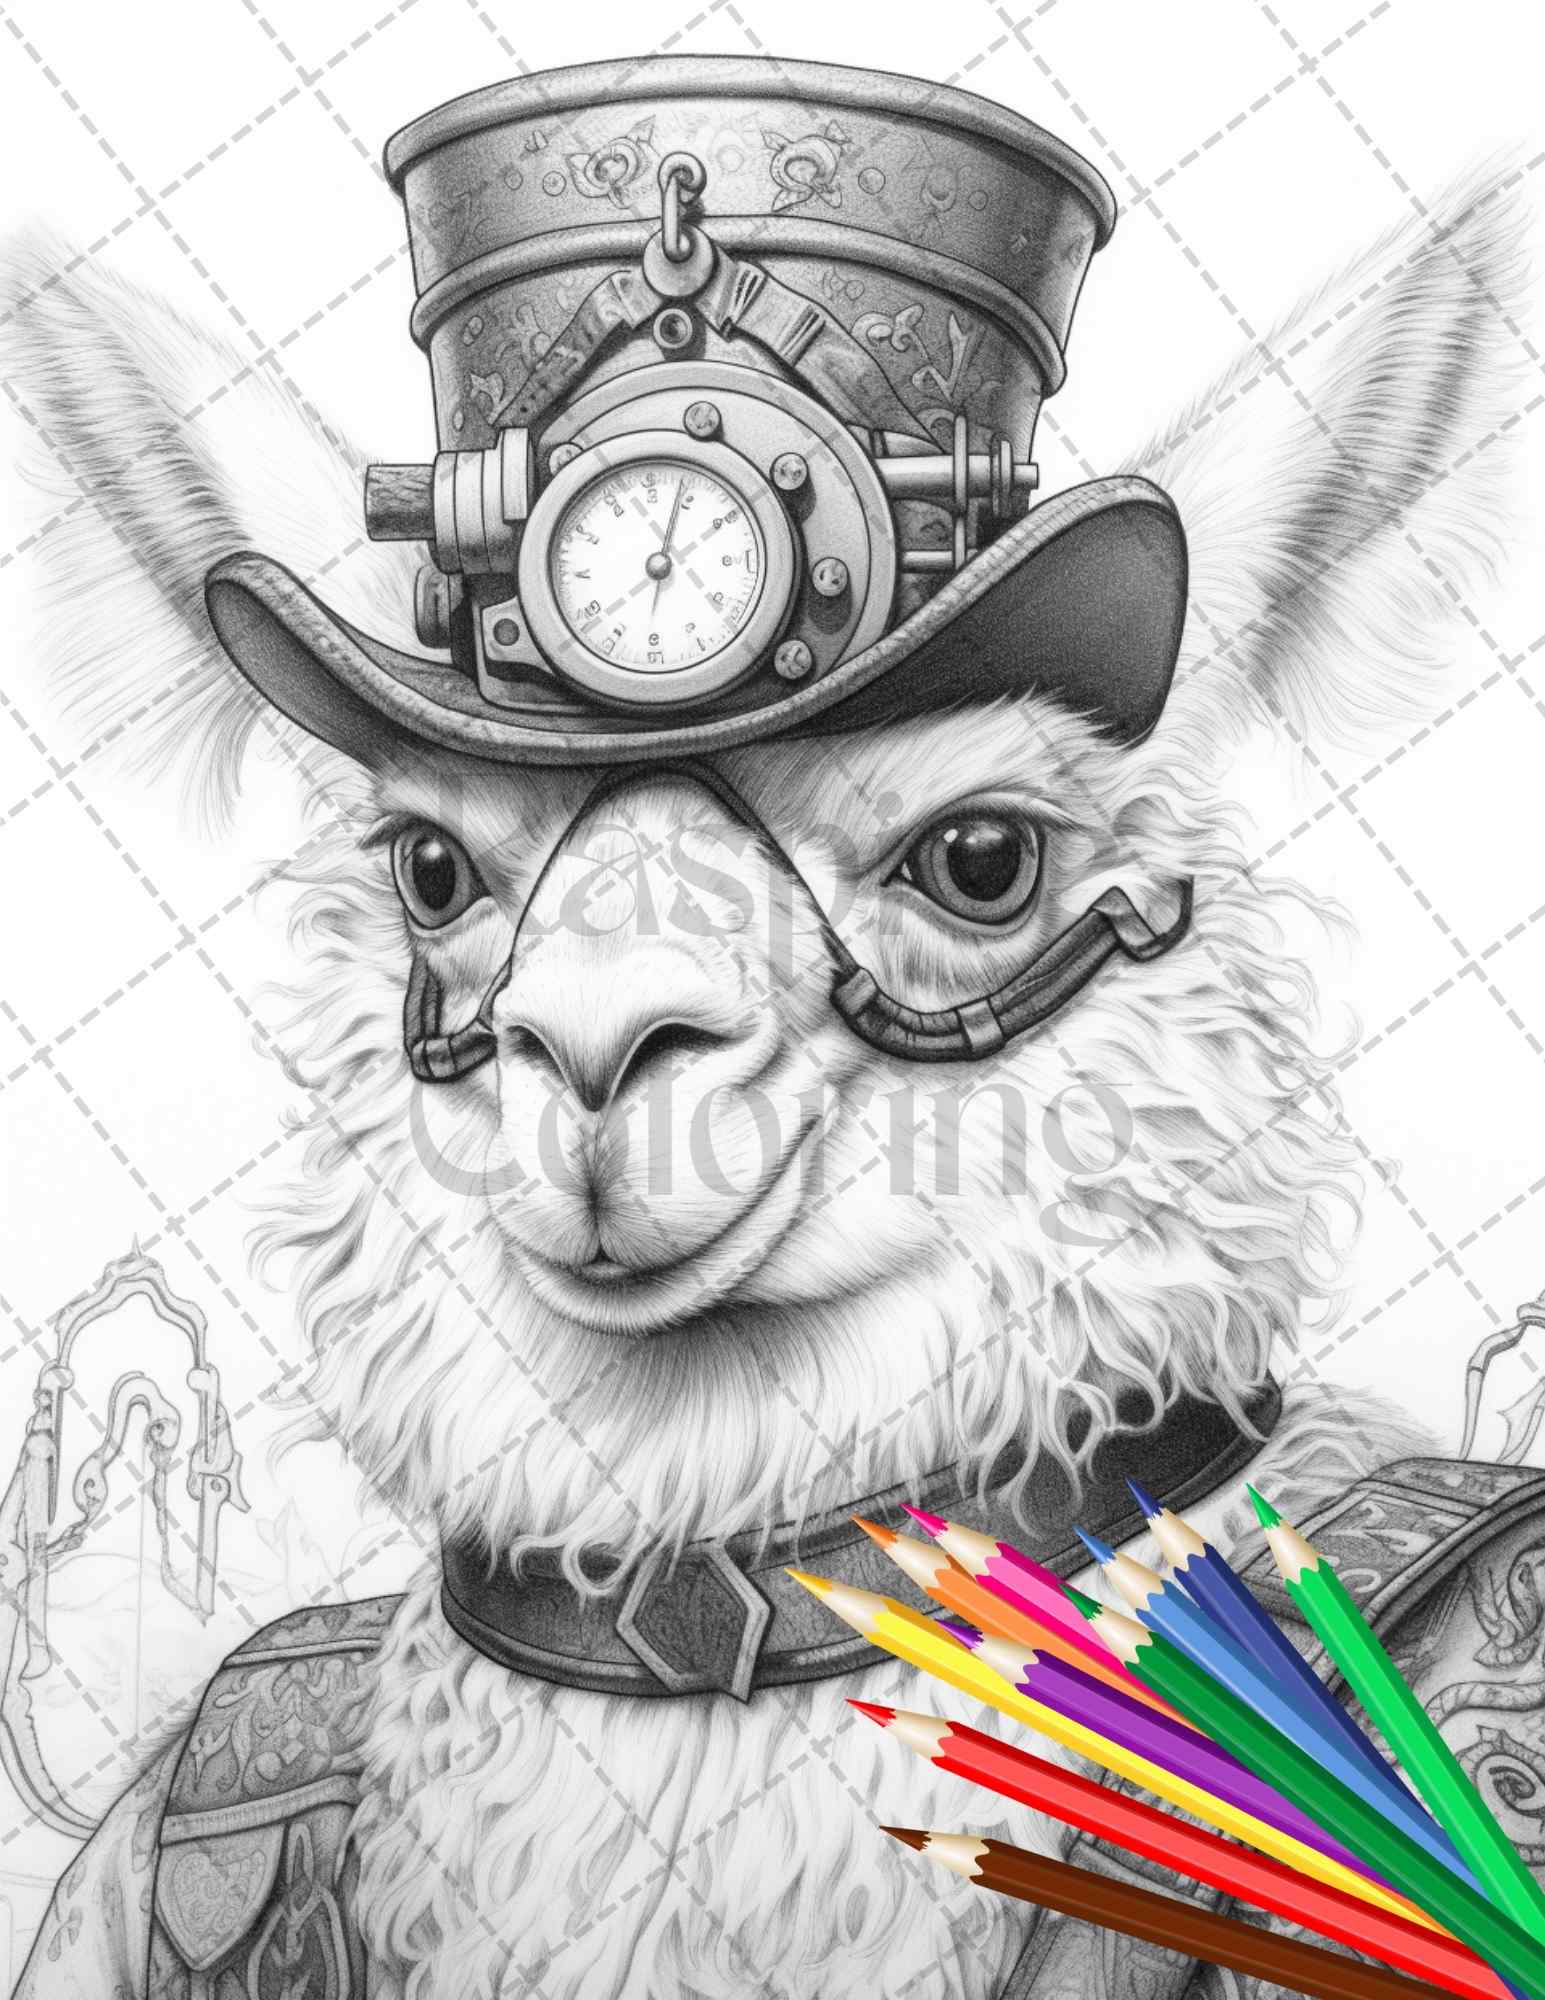 60 Steampunk Animals Grayscale Coloring Pages Printable for Adults, PDF File Instant Download - raspiee